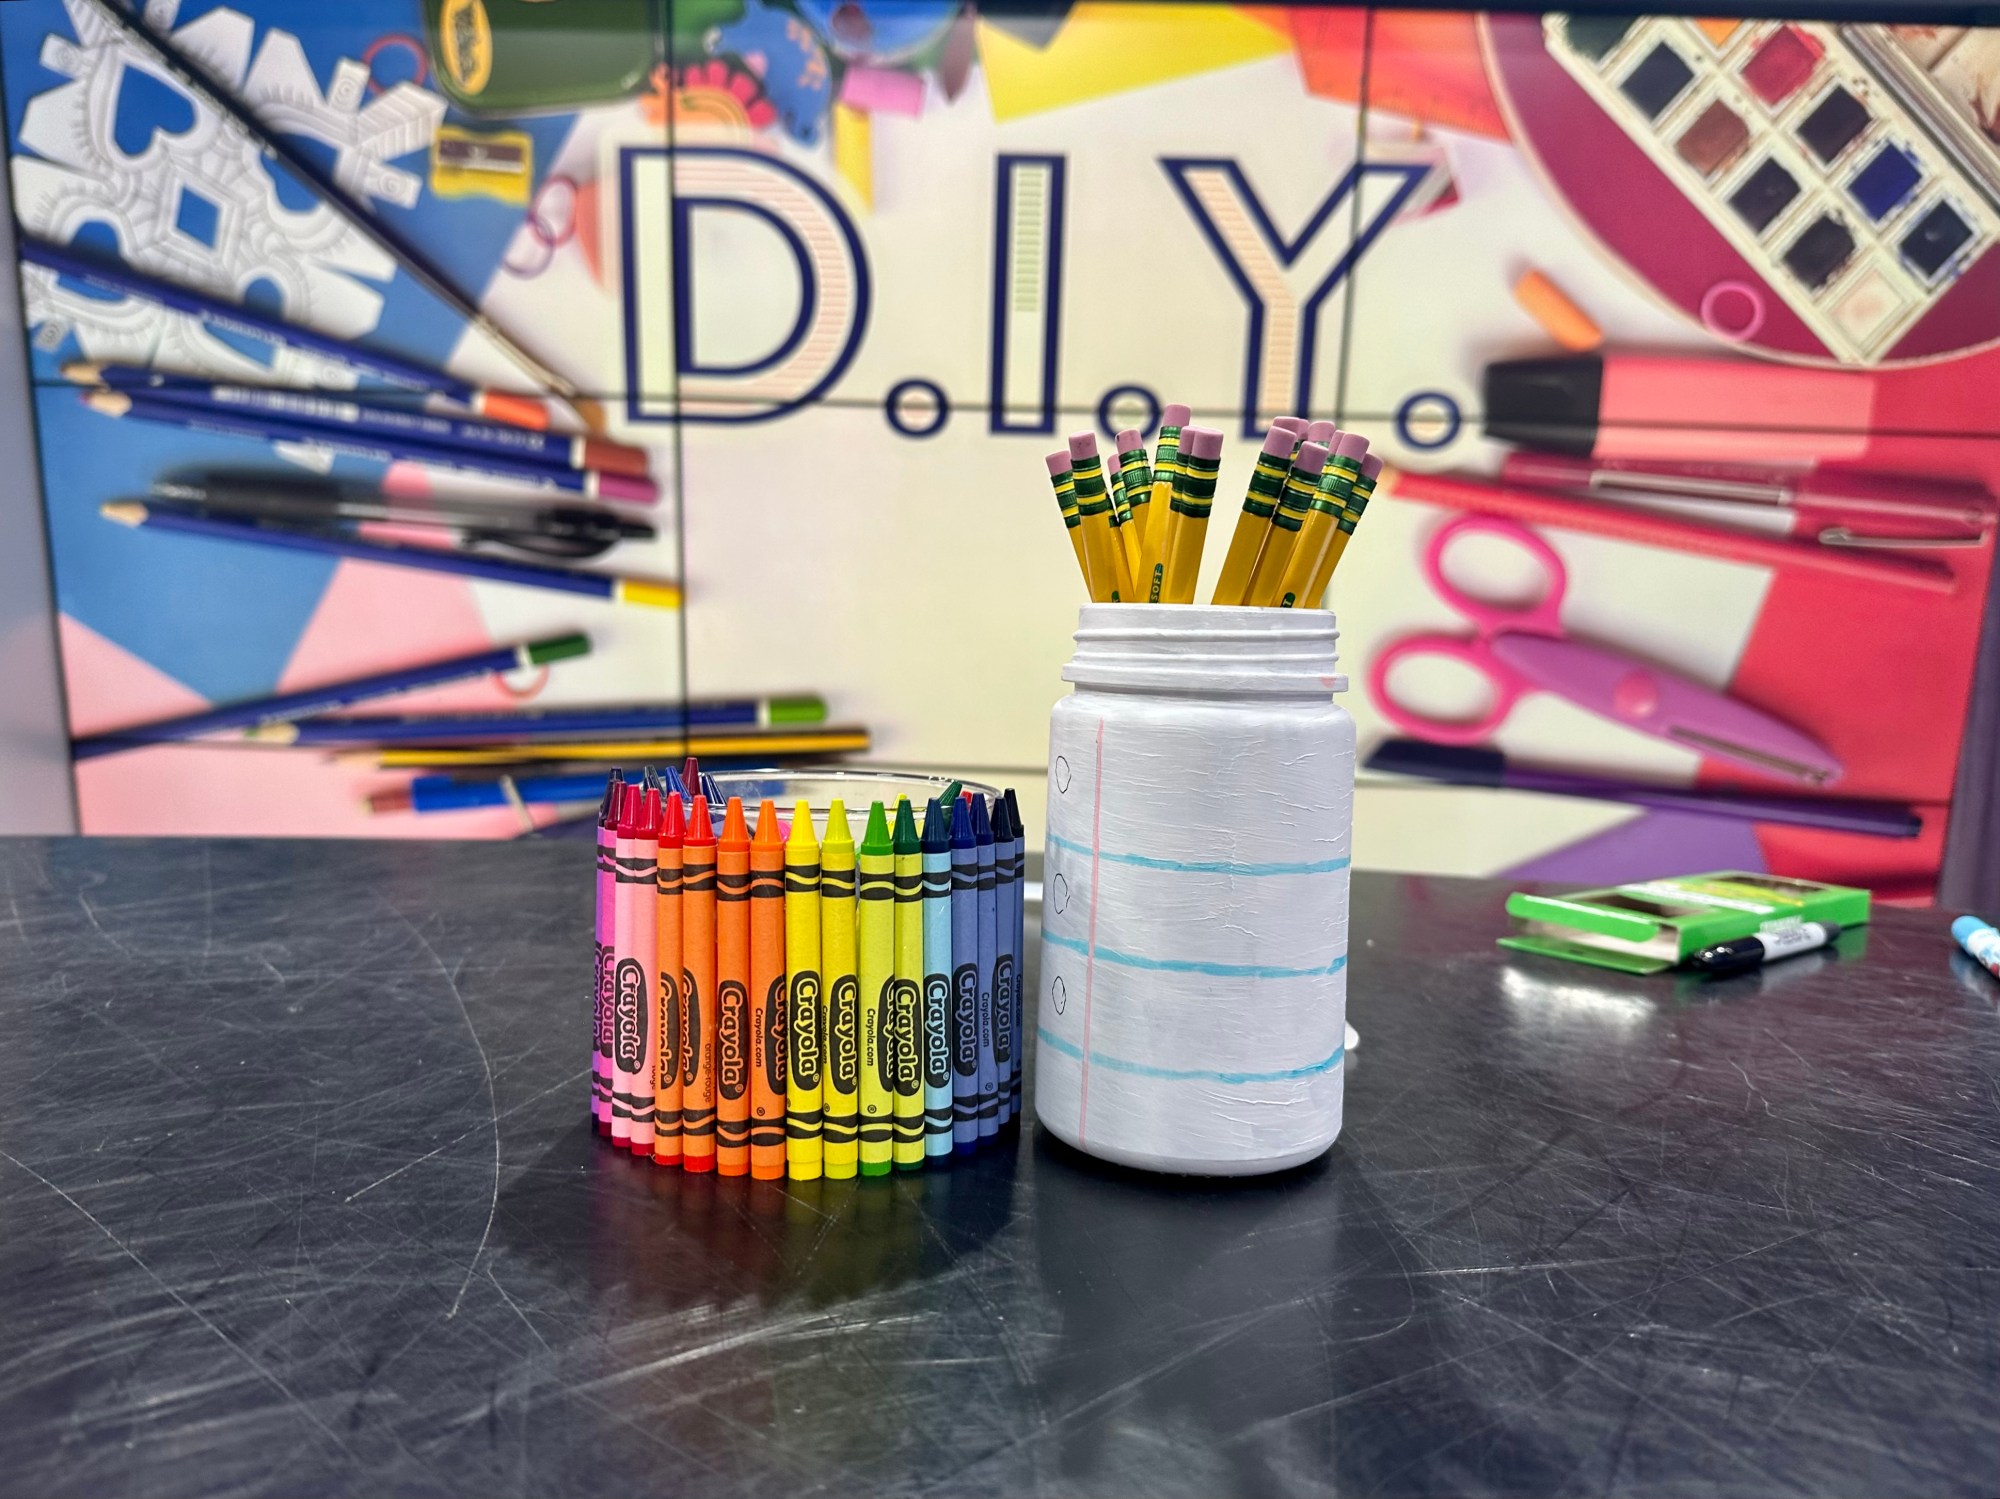 DIY Teacher gift containers